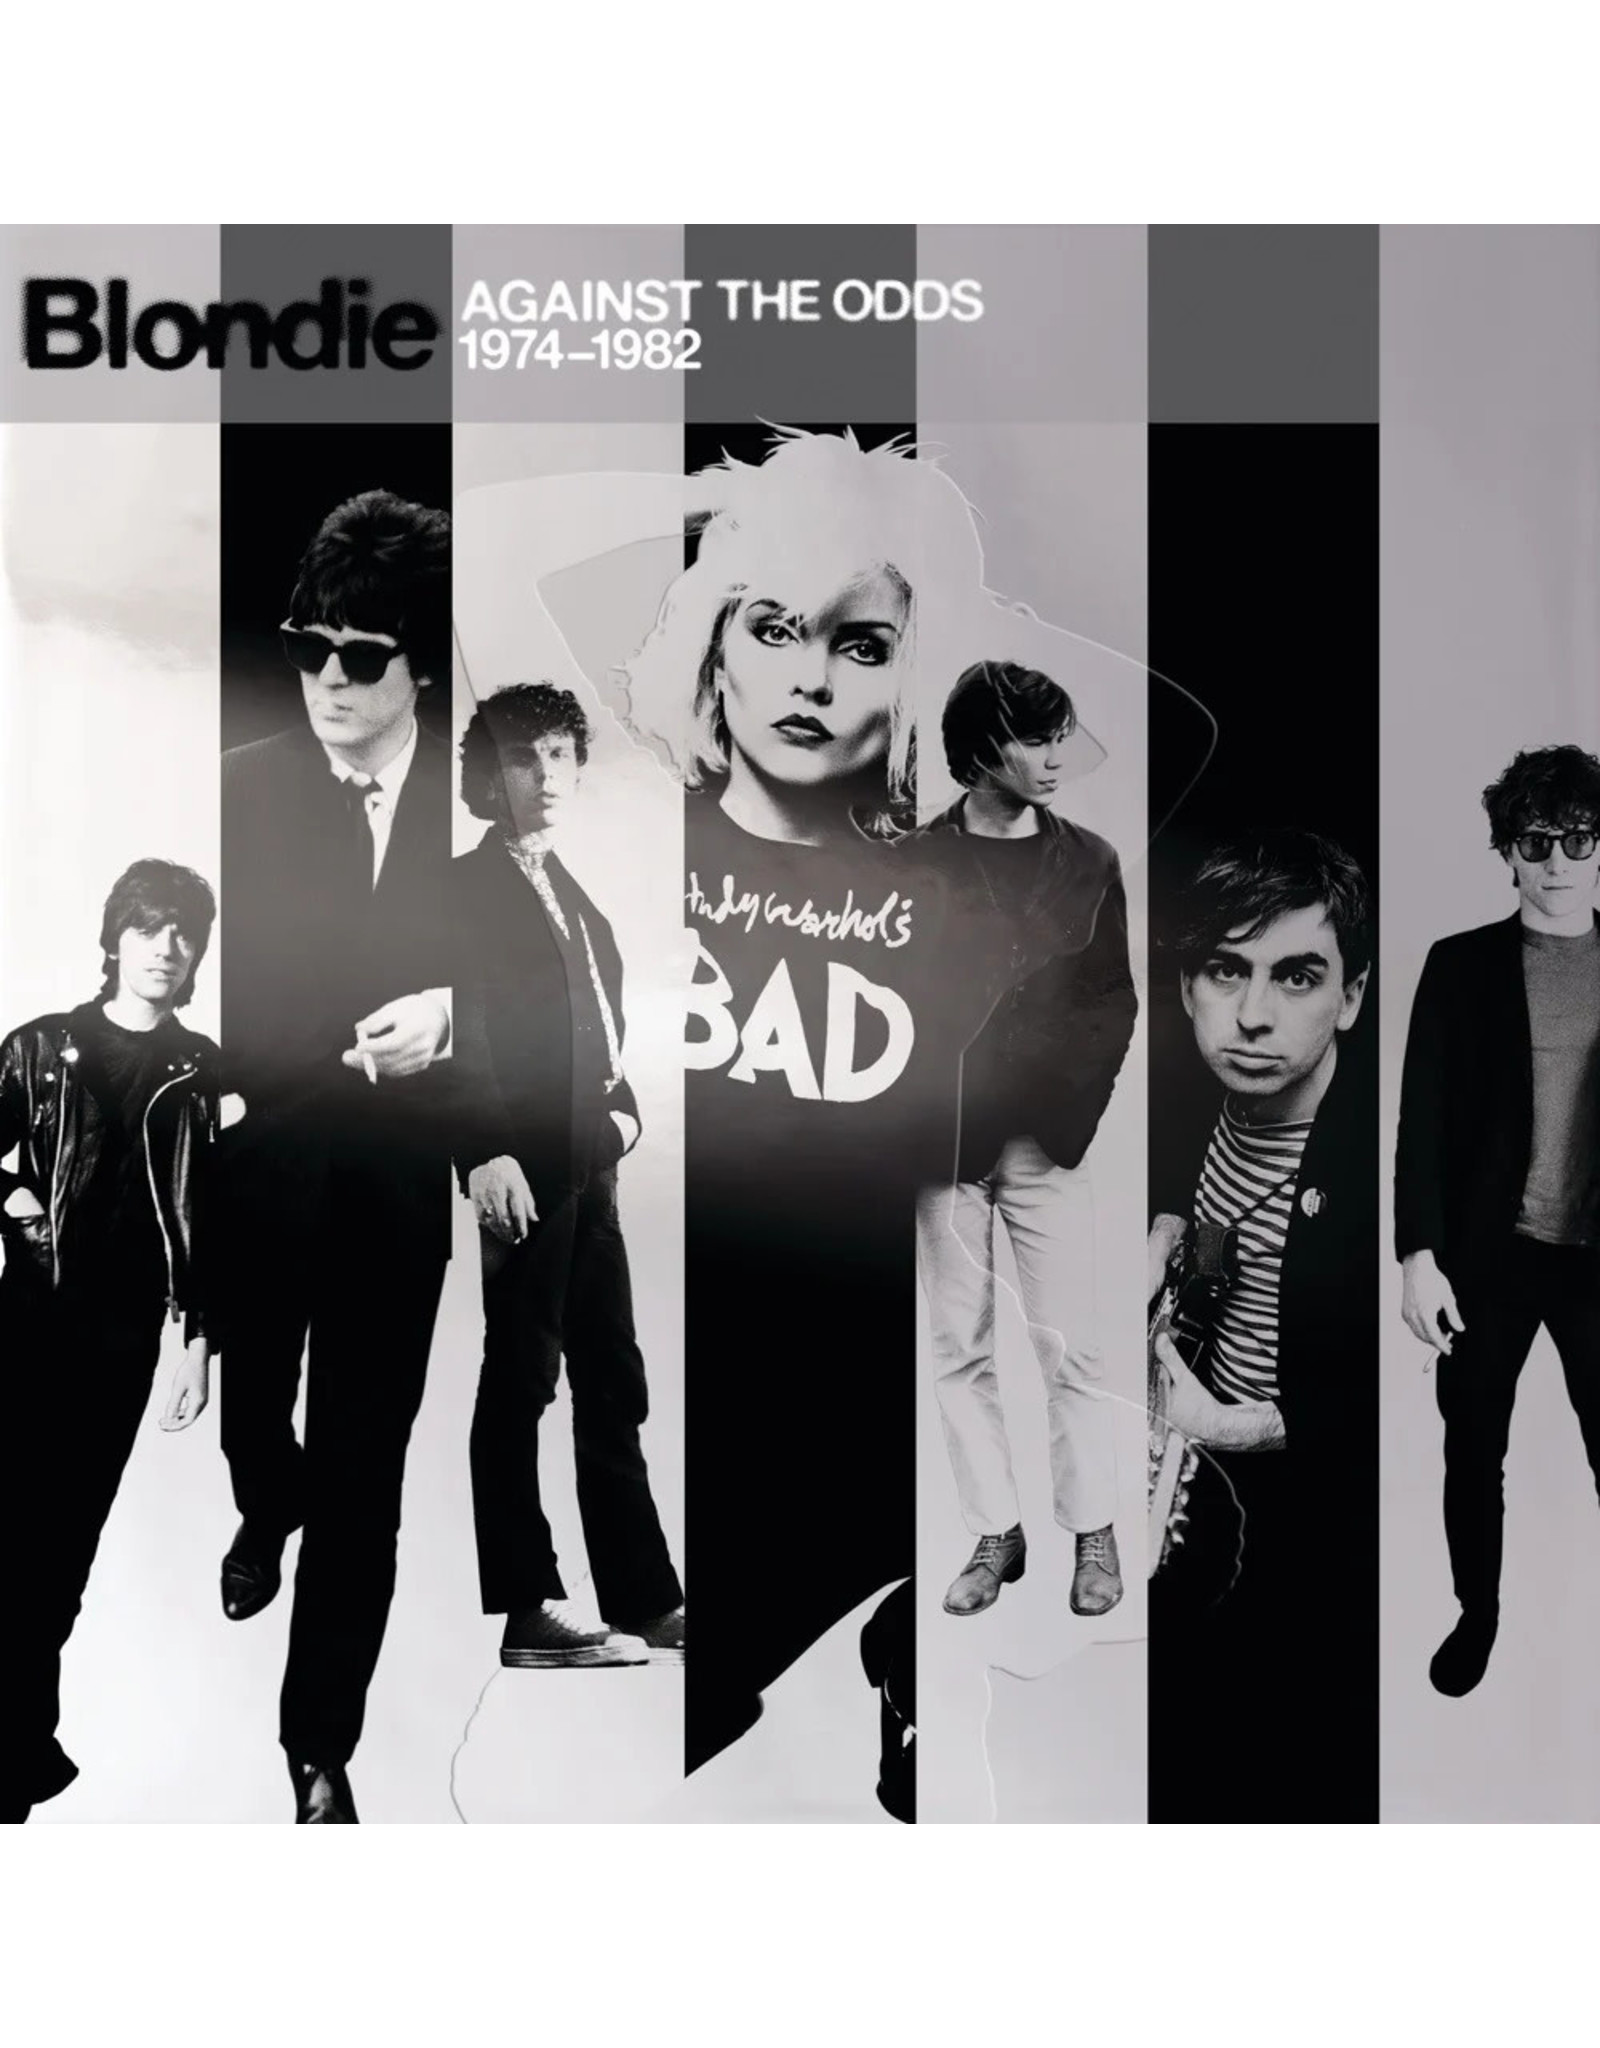 Numero Blondie: Against The Odds 1974-1982 (4LP/remastered/112-pg book) Dlx  Edition LP